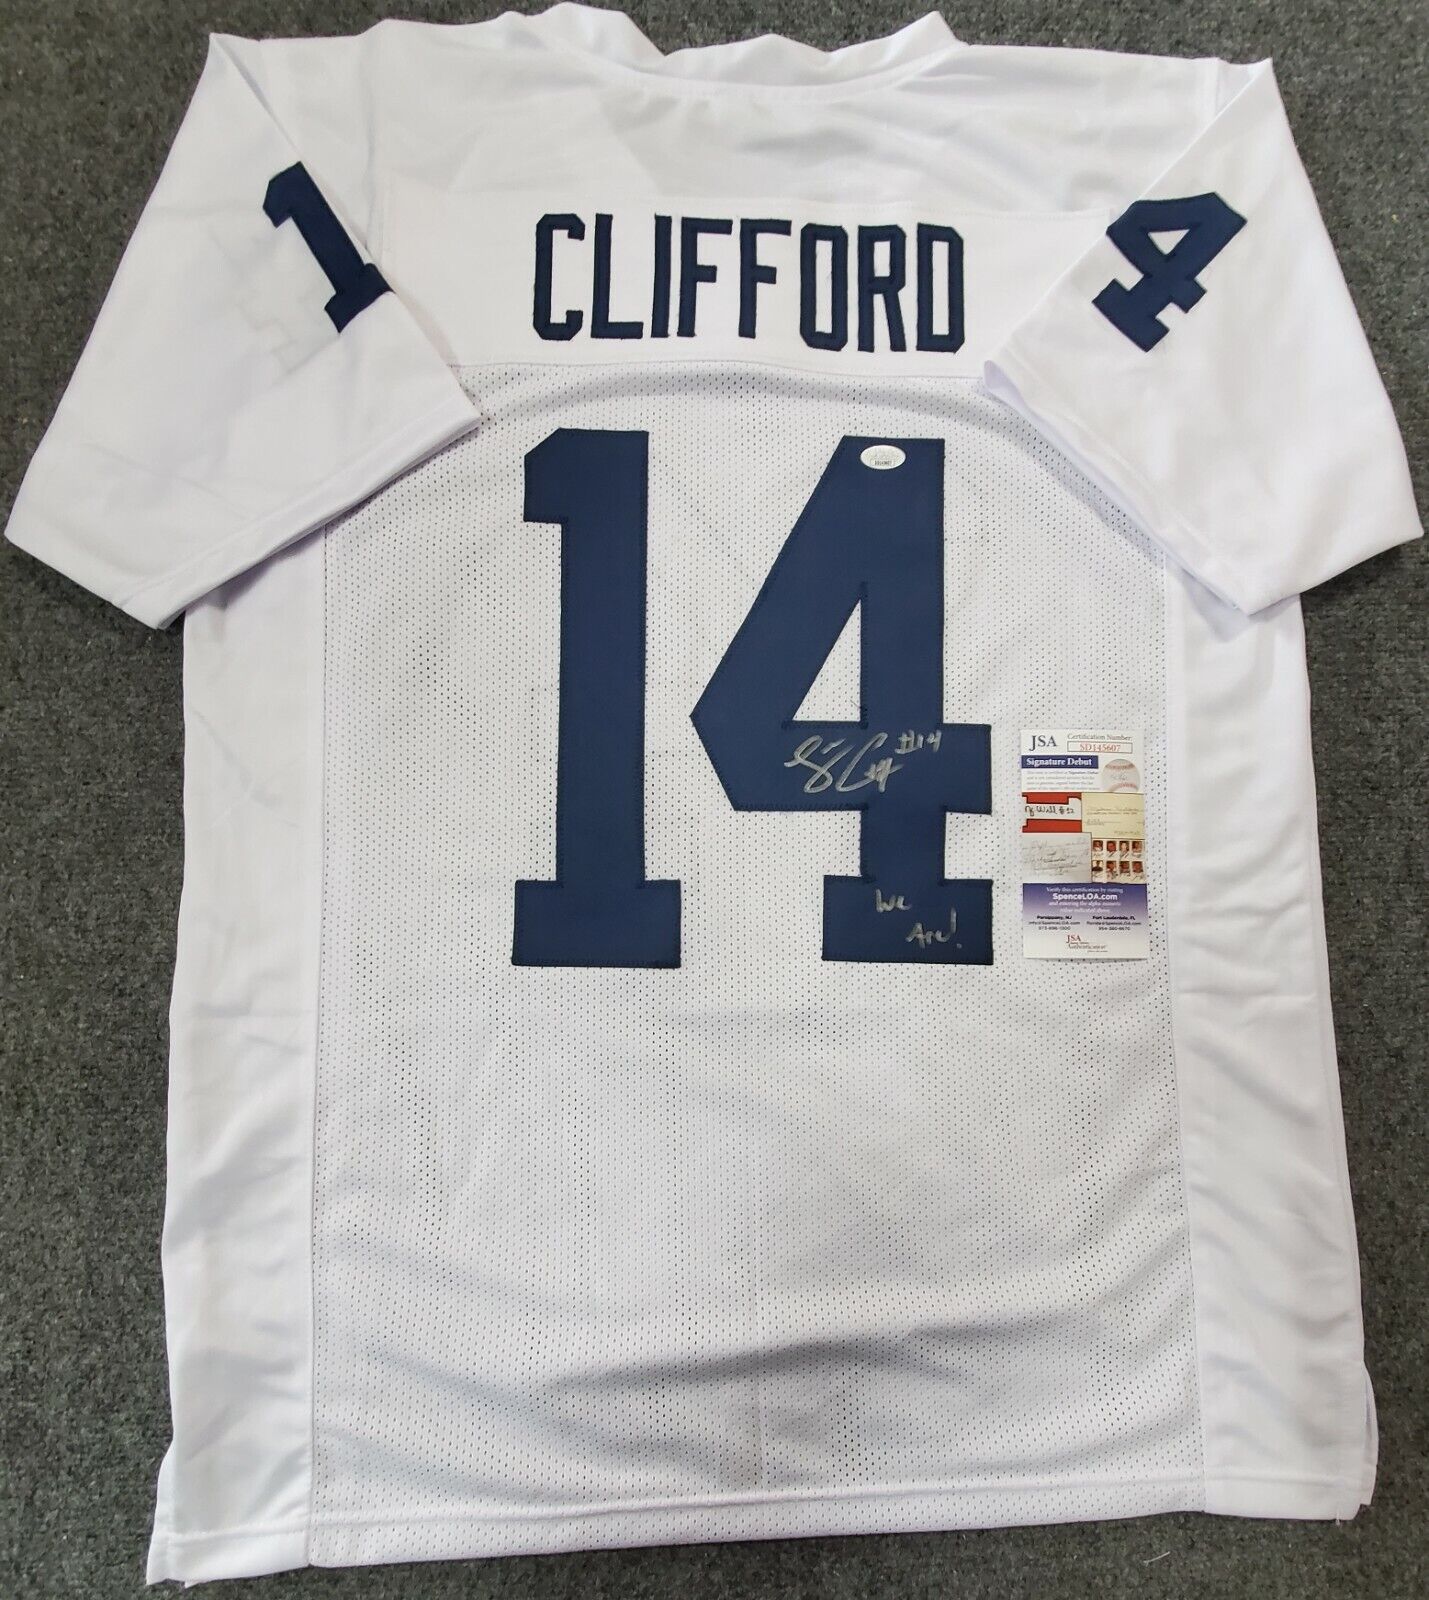 MVP Authentics Penn State Sean Clifford Autographed Signed Inscribed Jersey Jsa Coa 116.10 sports jersey framing , jersey framing